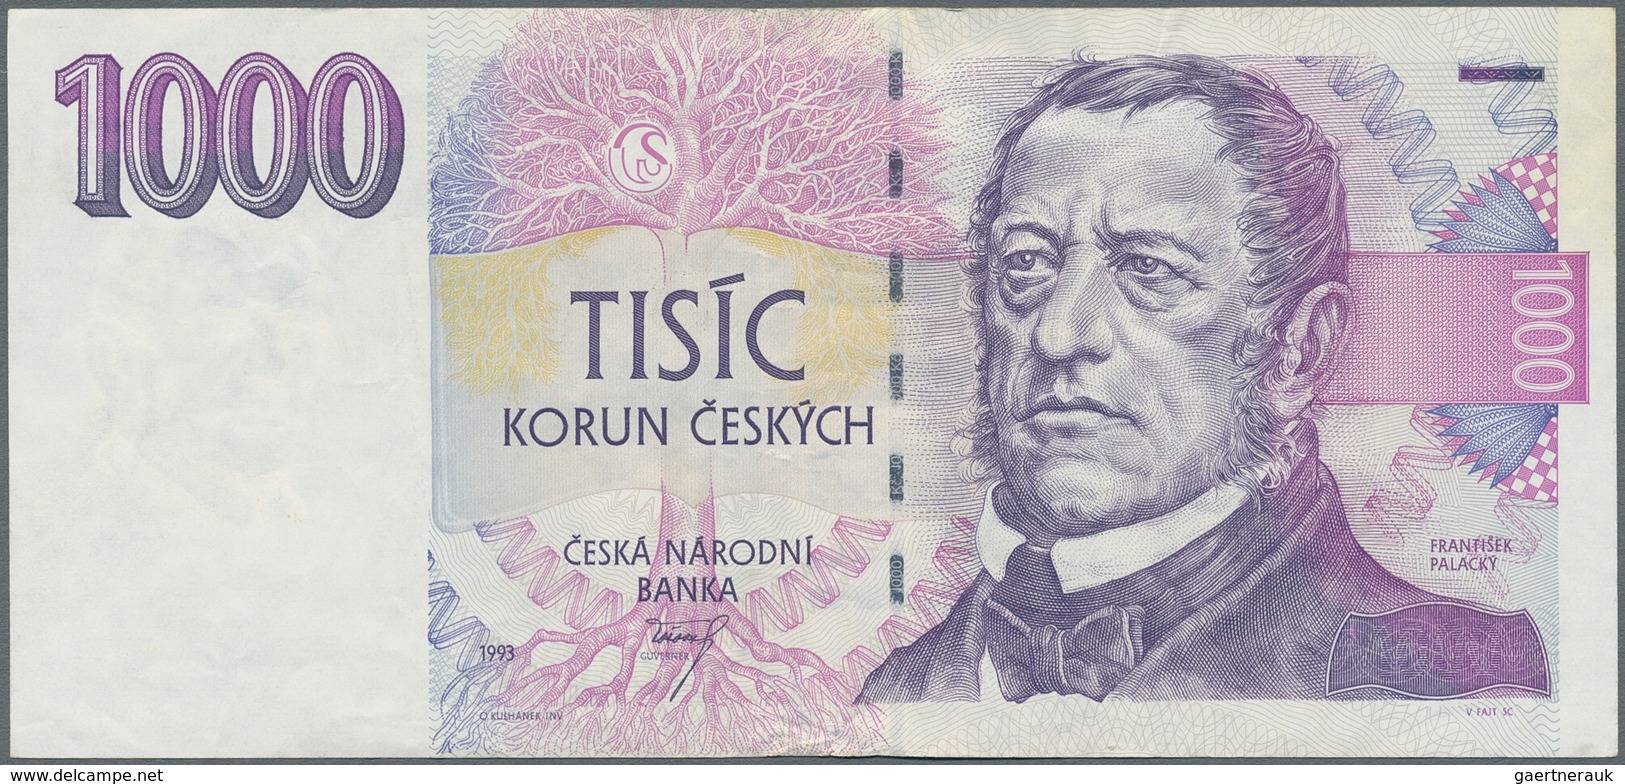 Alle Welt: Collectors book with 134 banknotes from all over the world comprising for example Lithuan